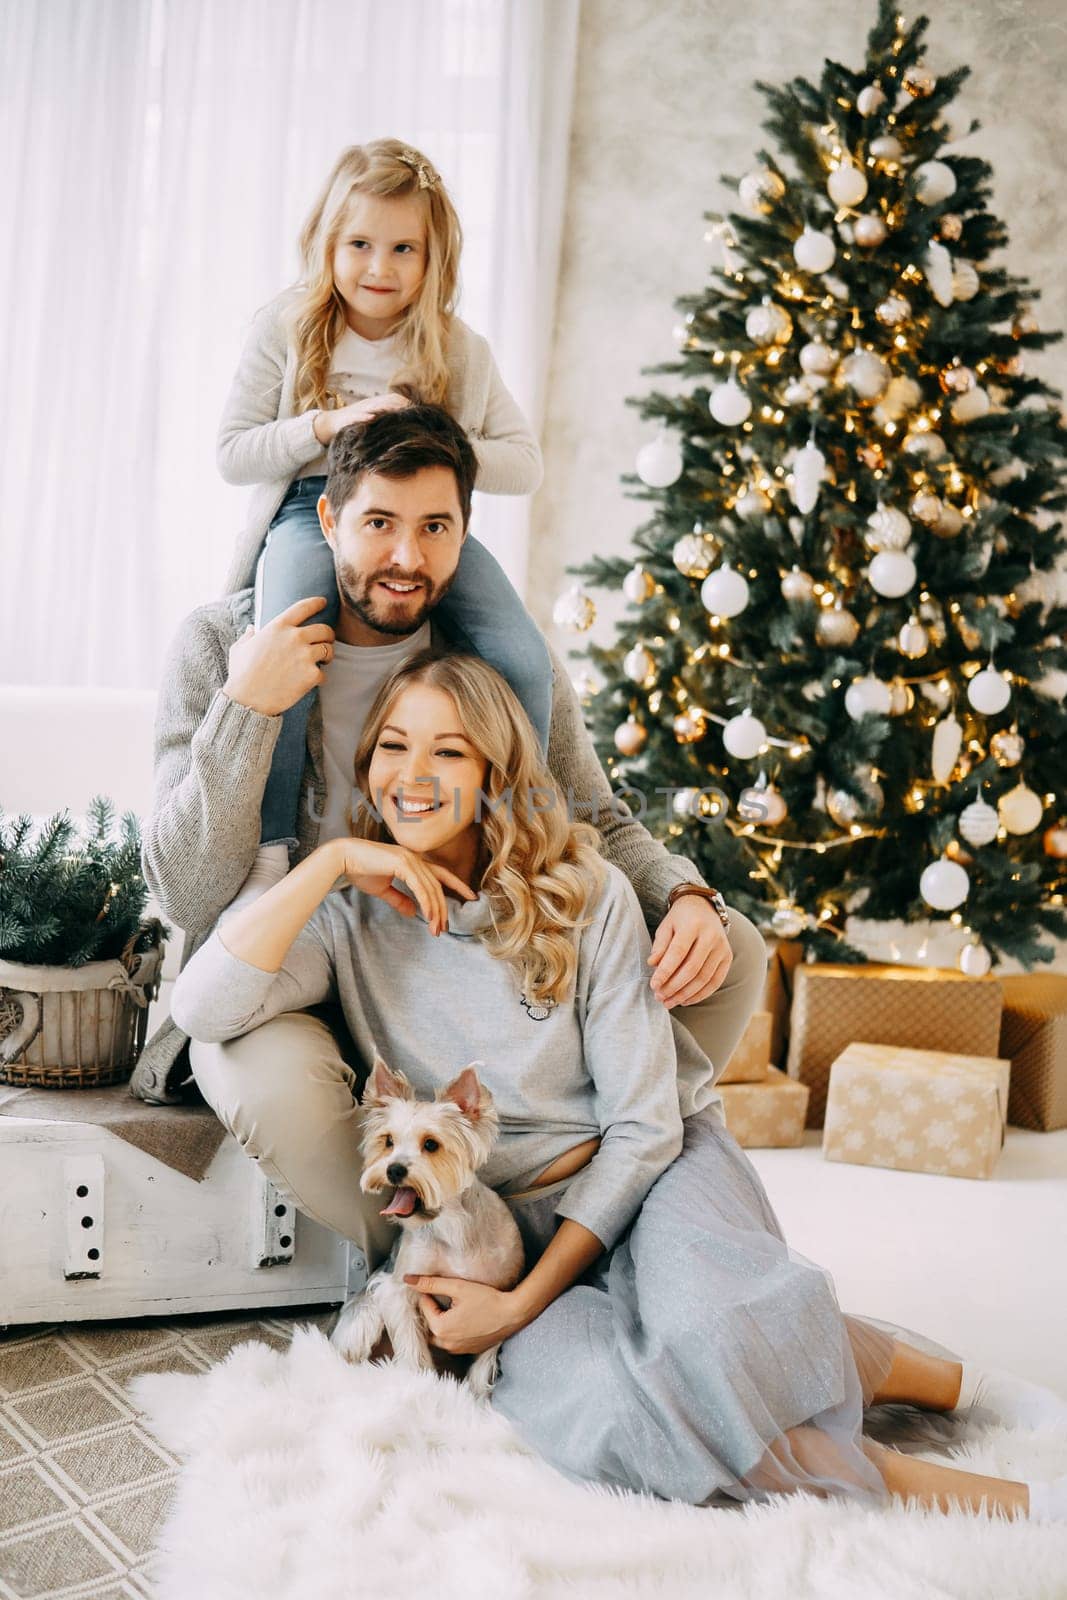 Happy family: mom, dad and daughter. Family in a bright New Year's interior with a Christmas tree